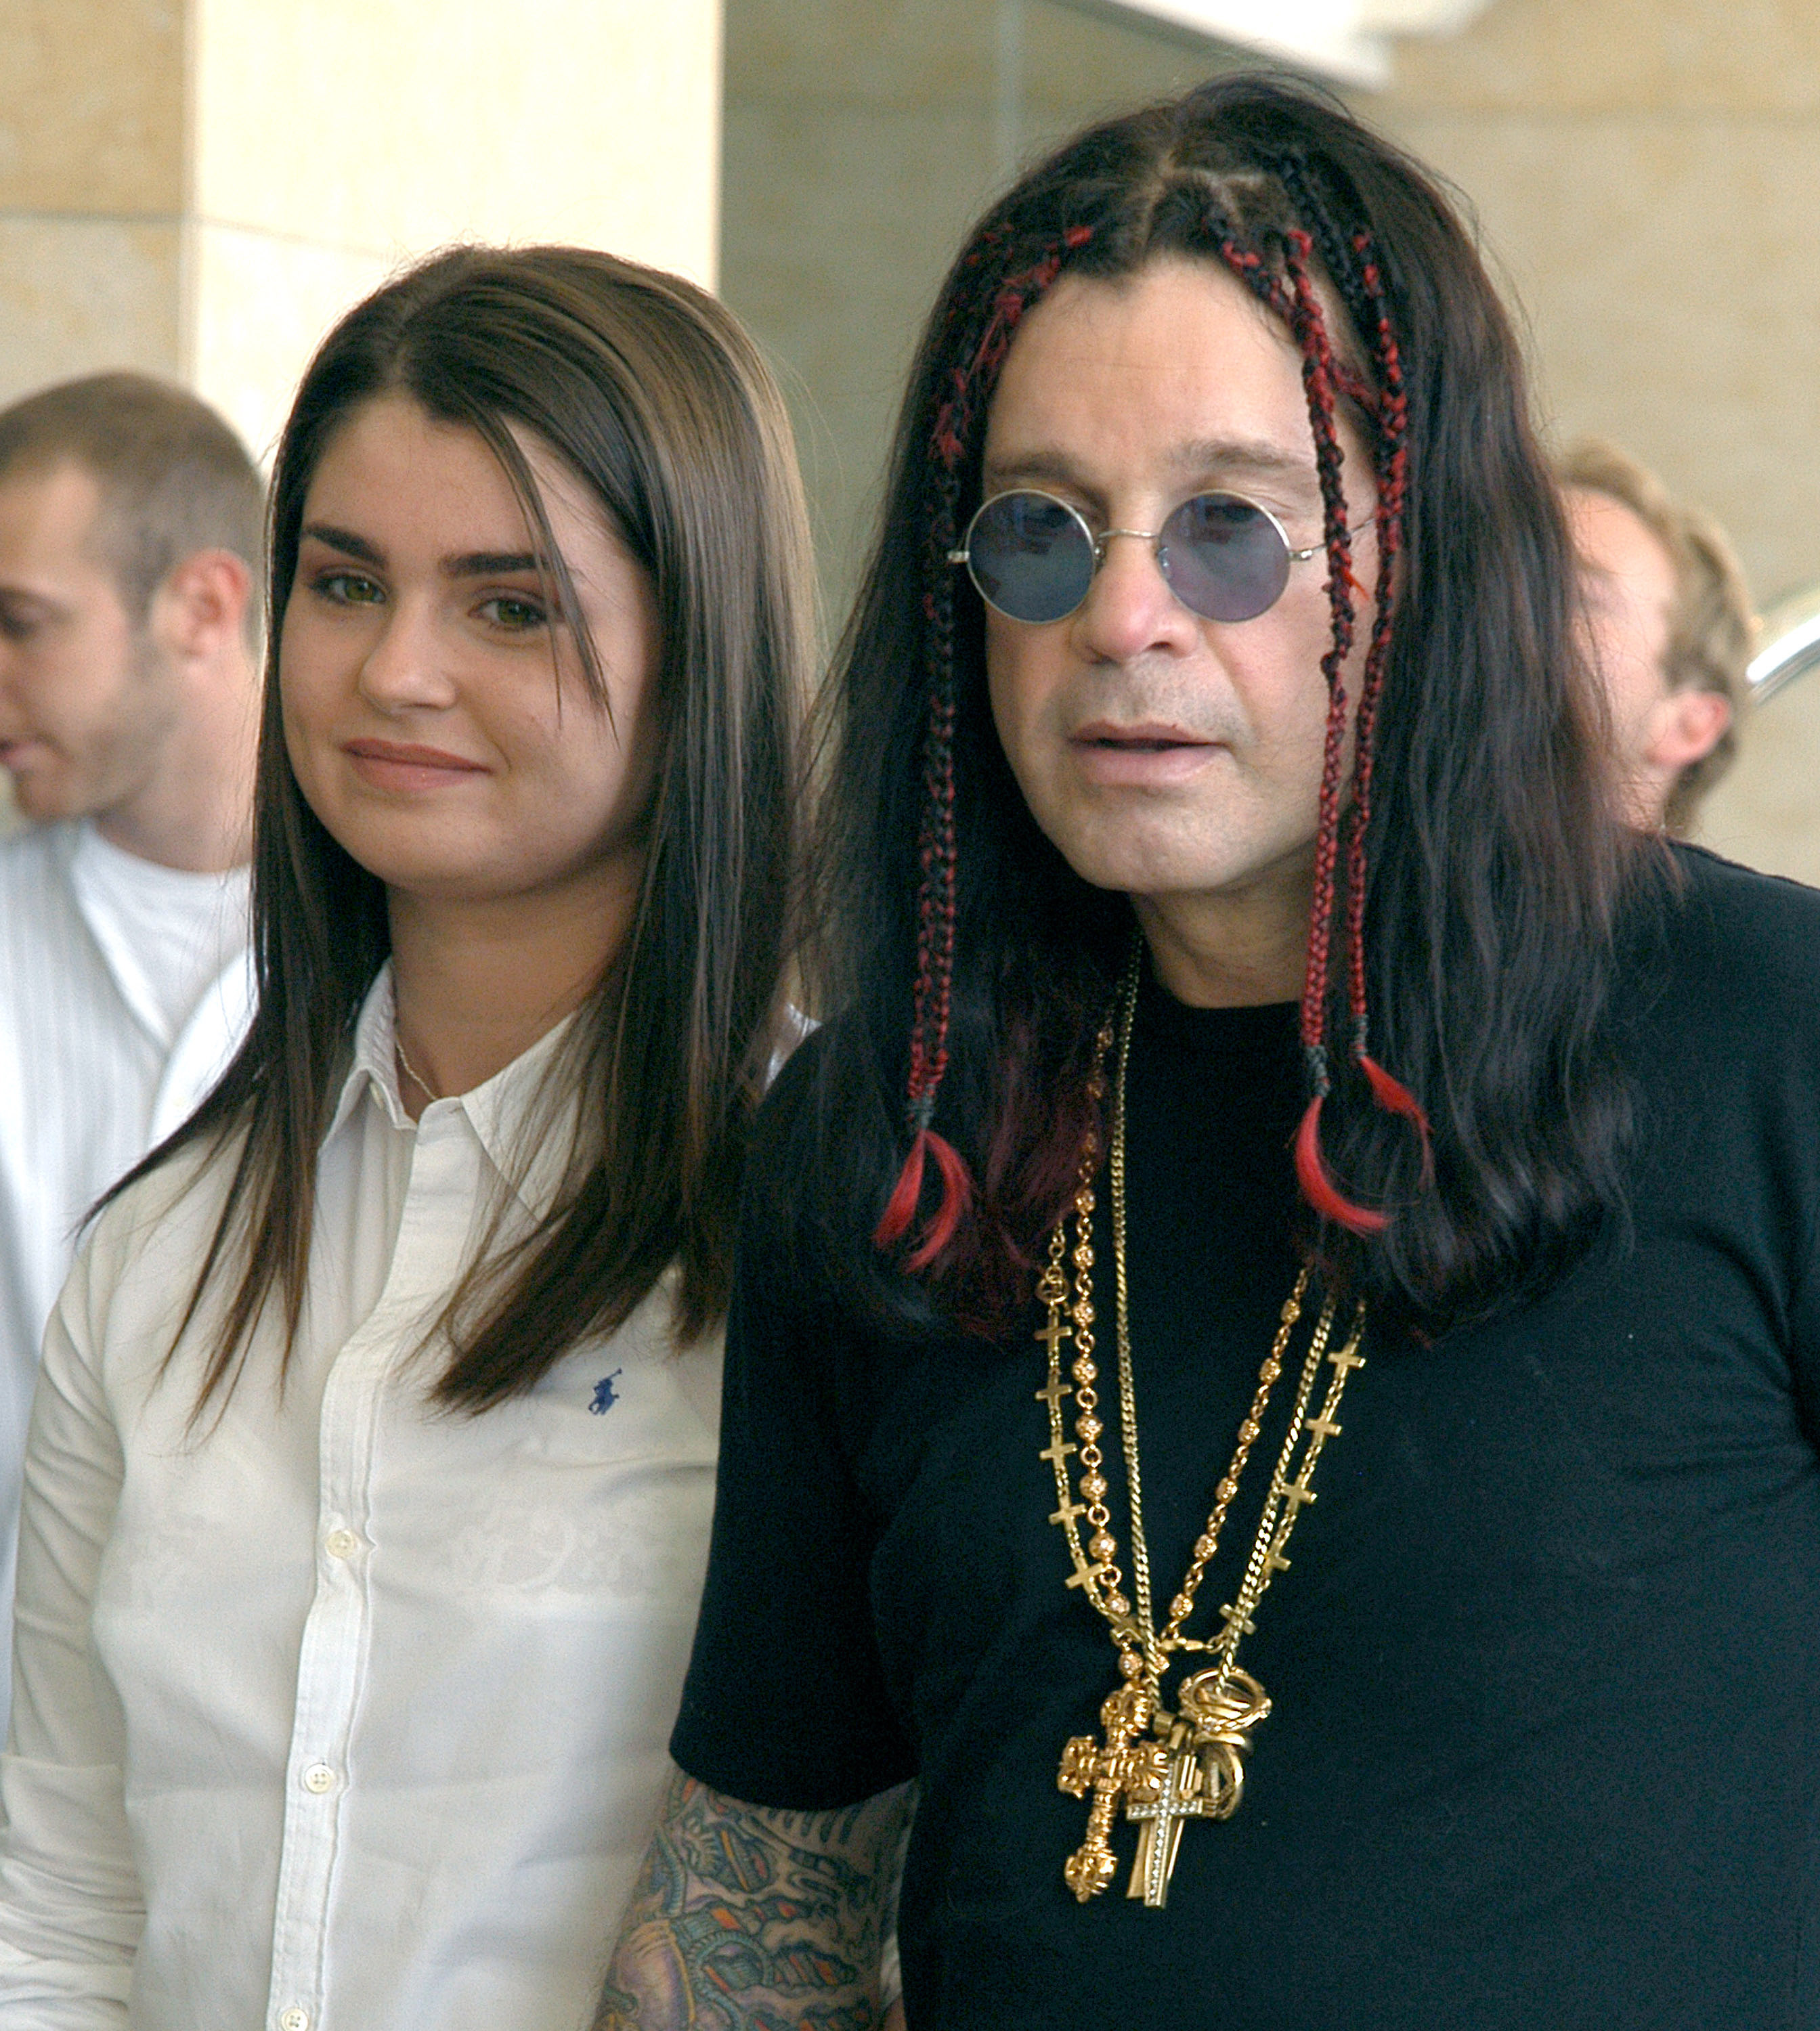 Aimee and Ozzy Osbourne on day 1 of the TCA July 2003 Cable Press Tour in Hollywood | Source: Getty Images